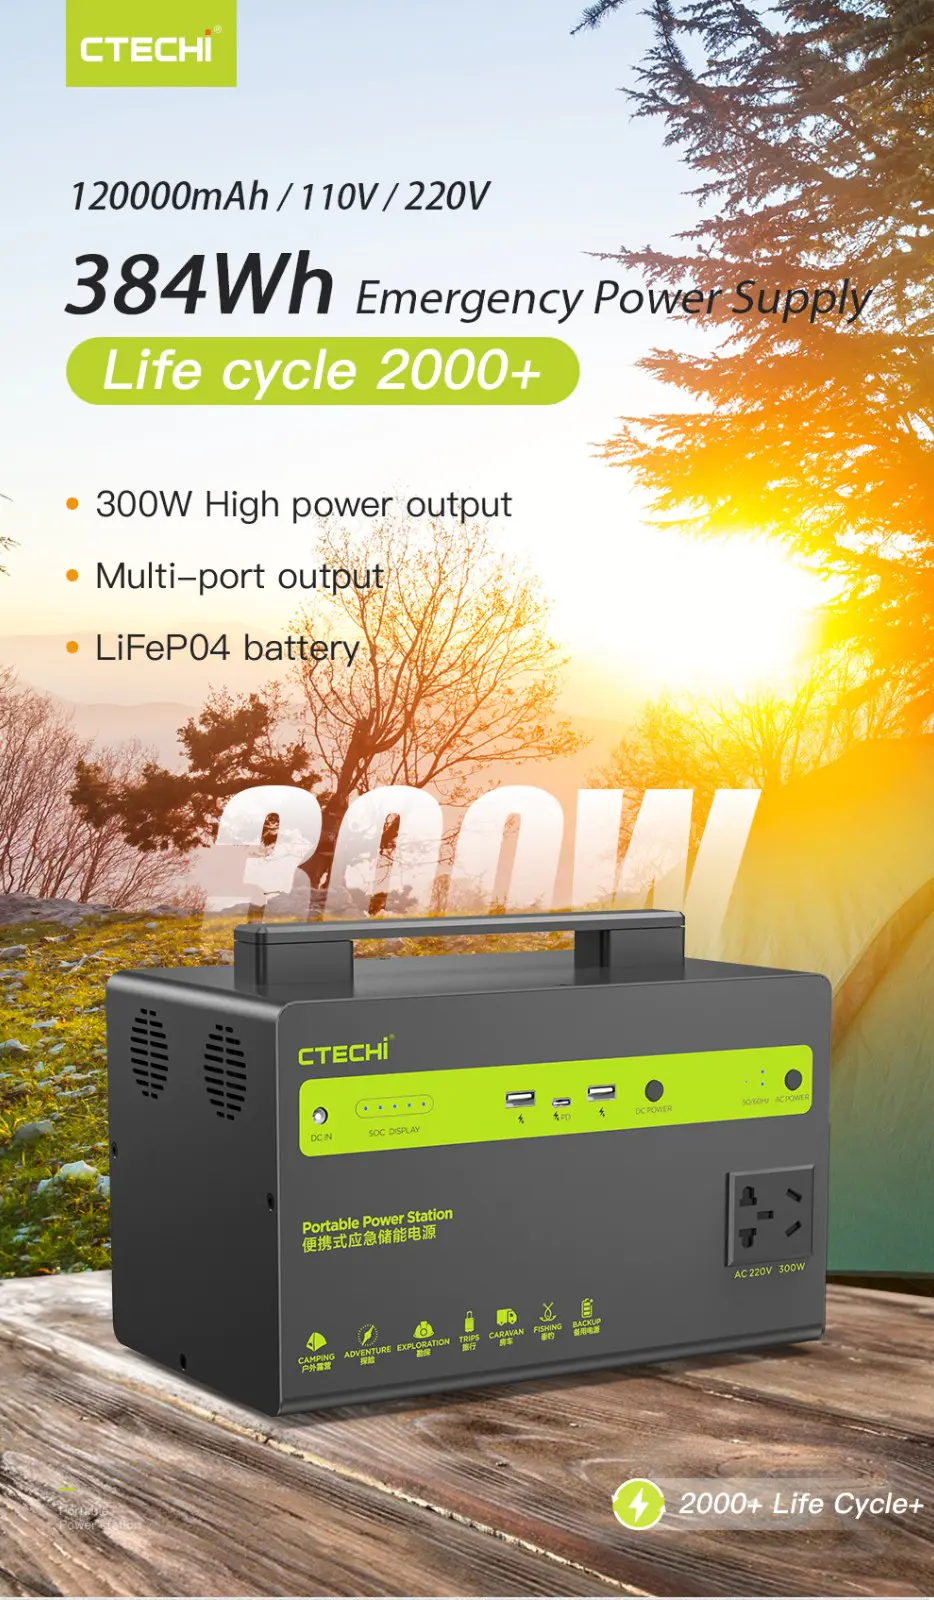 CTECHi portable power station 220v customized for outdoor